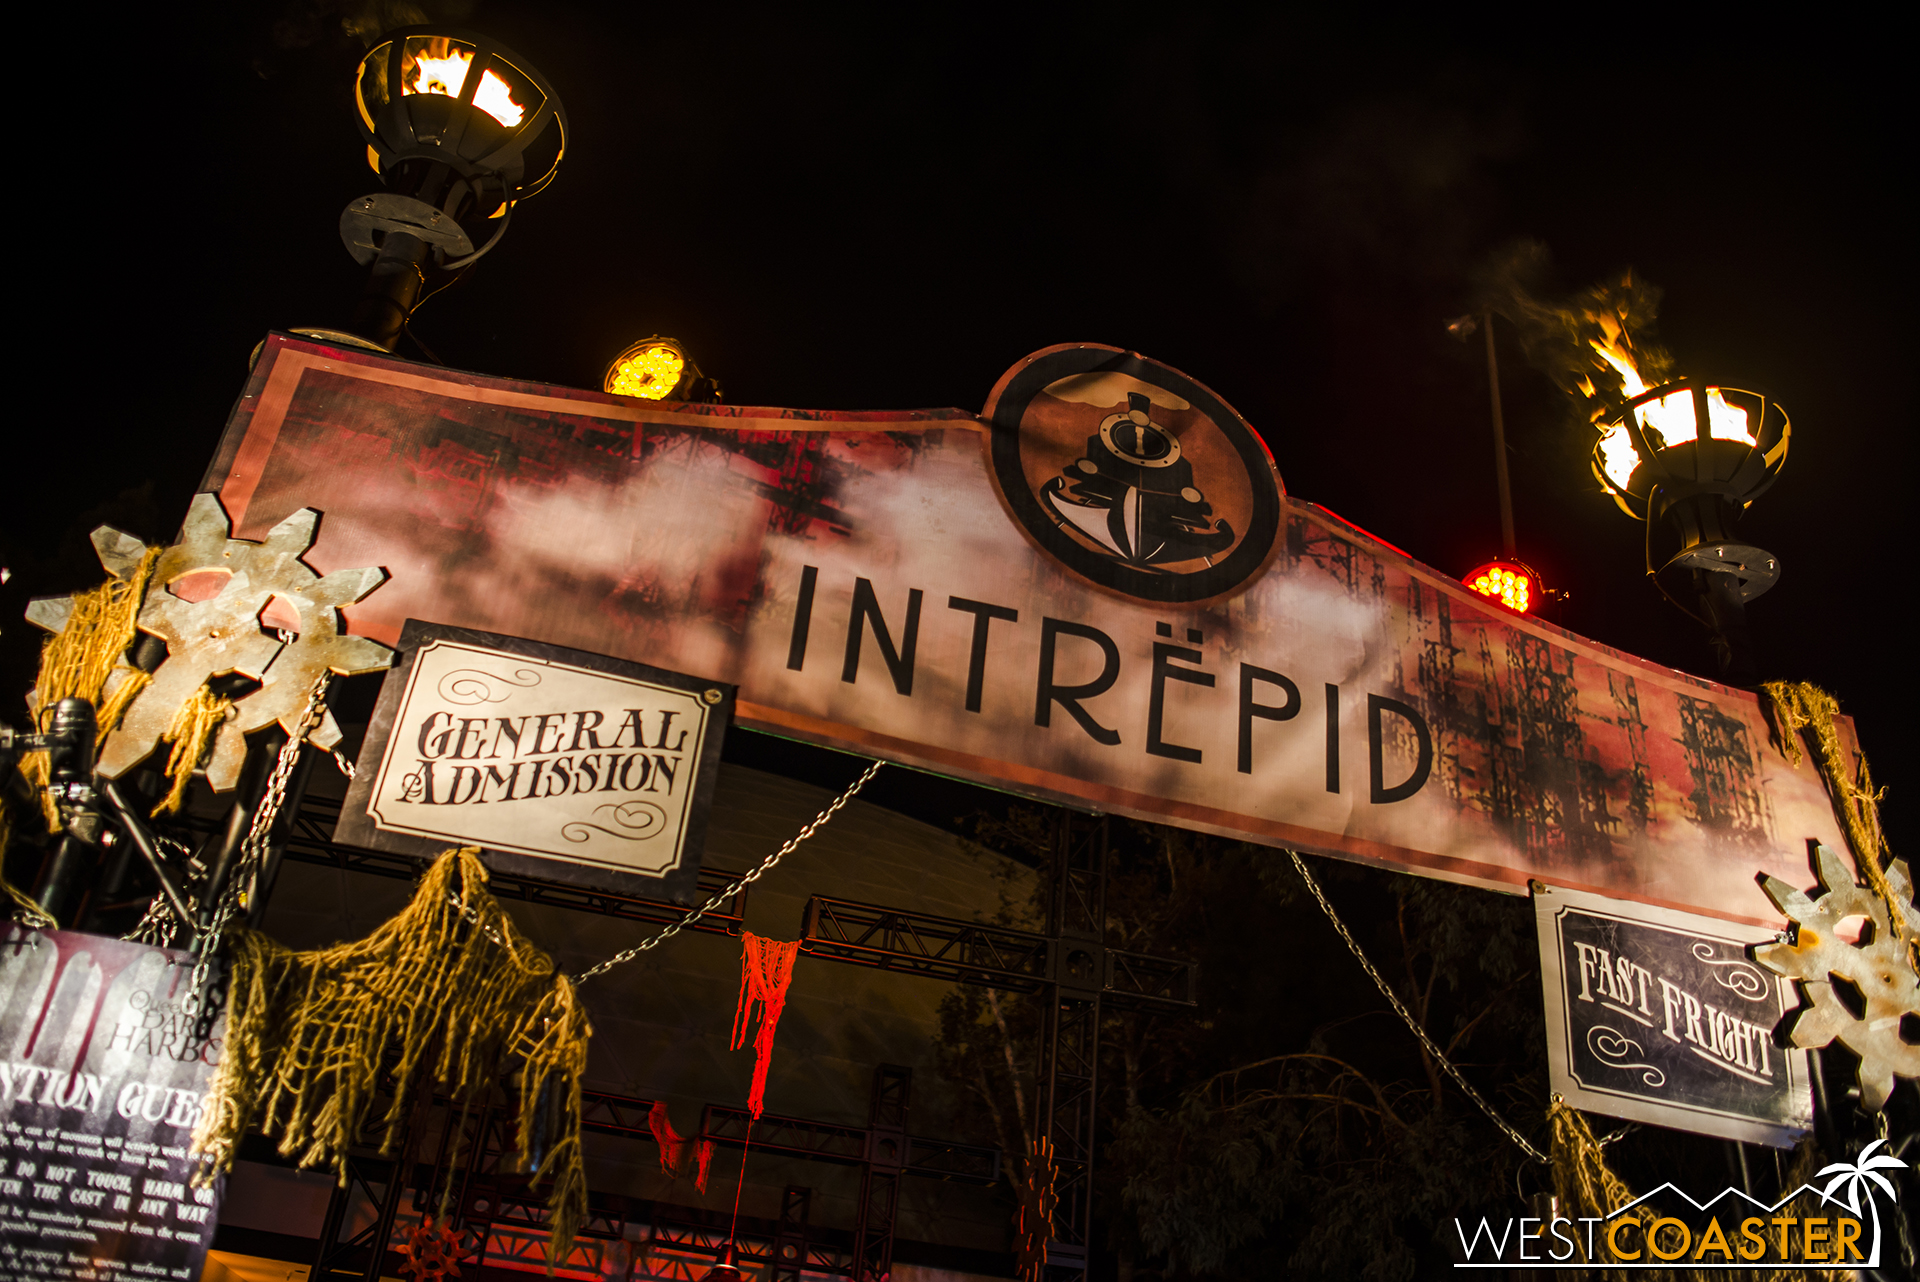  Welcome to Intrepid. 